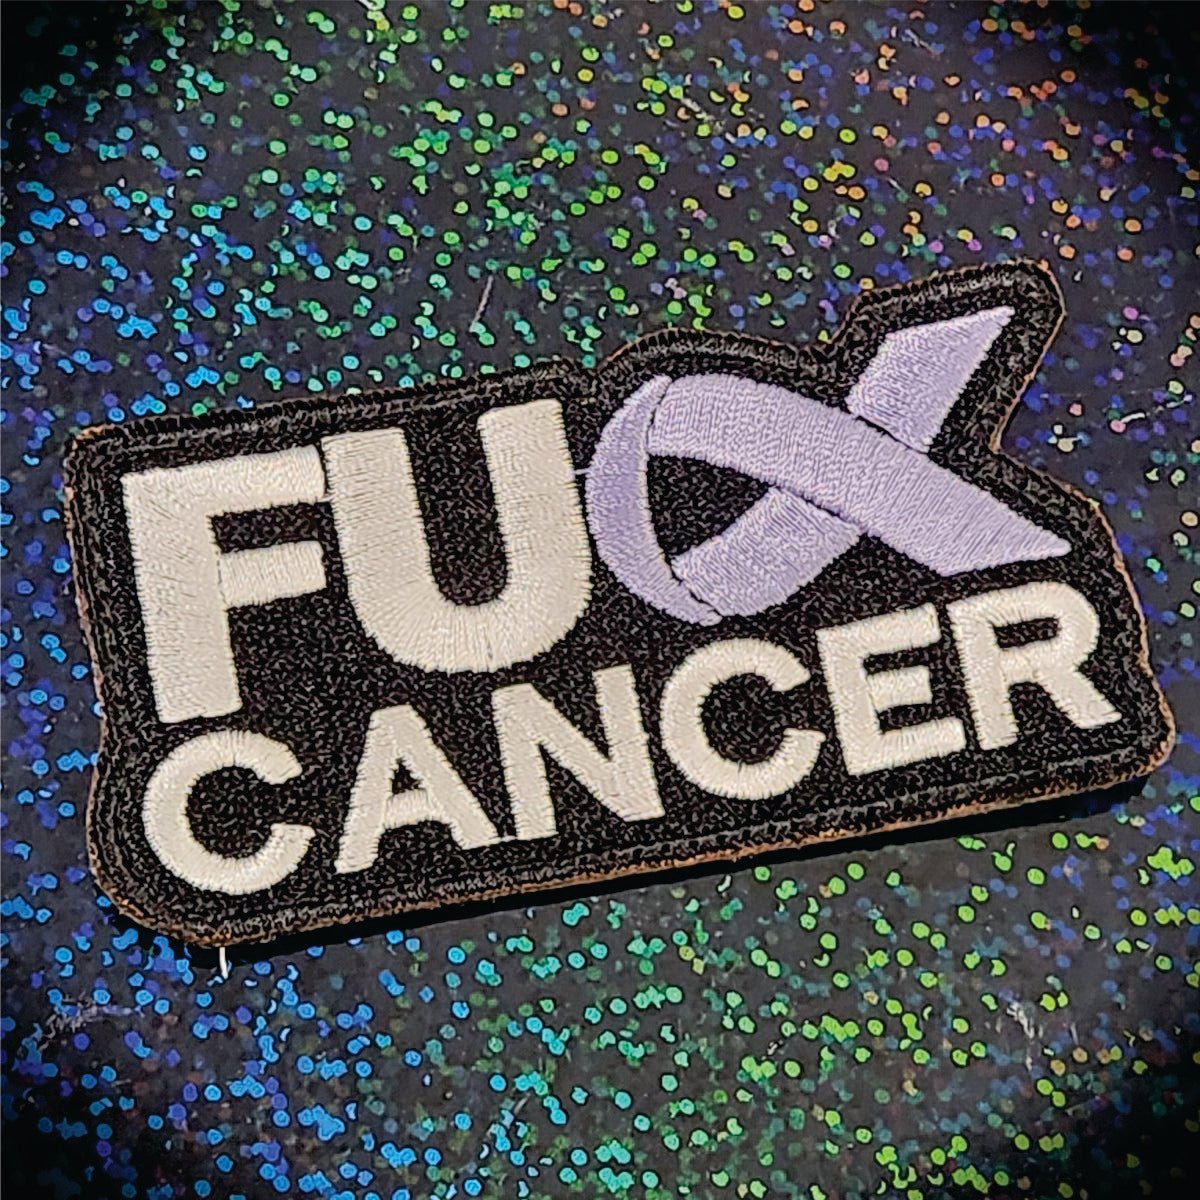 PWM - Fuck Cancer - 3.25" Embroidered Patch & Sticker Combo